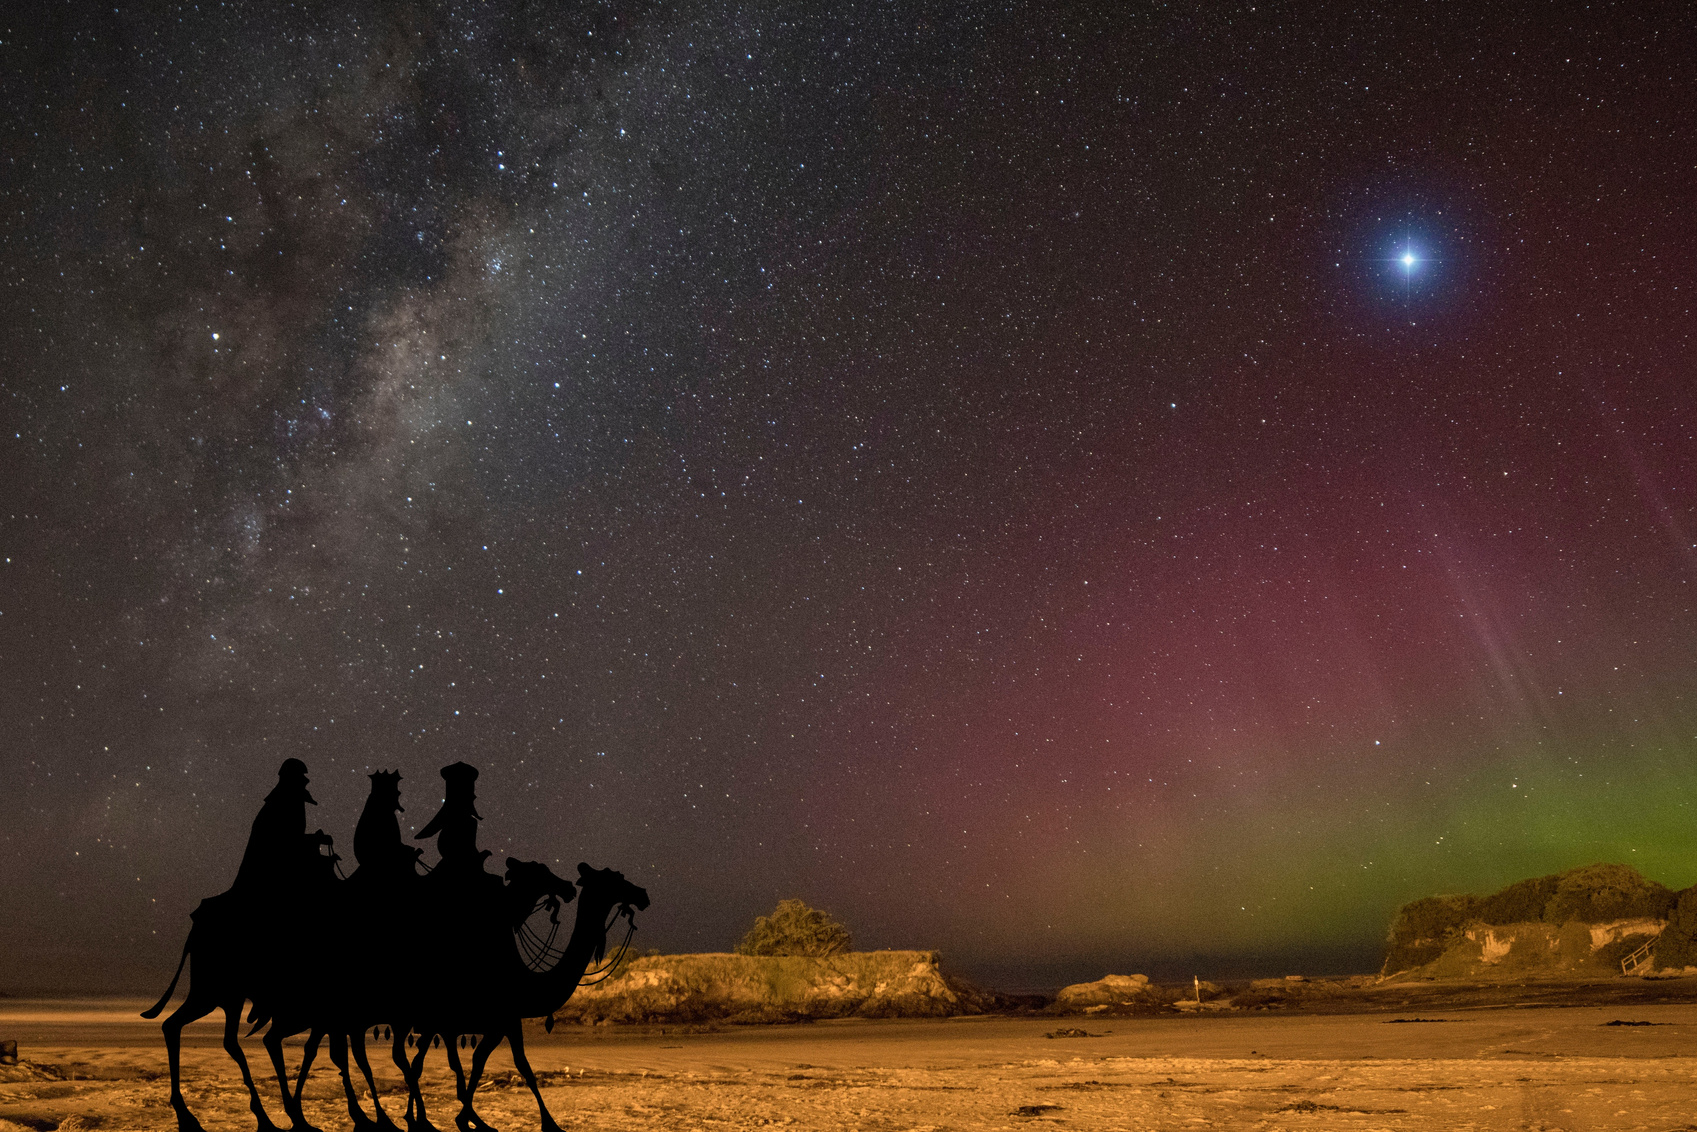 Silhouette of the wise men, Traveling in the desert.